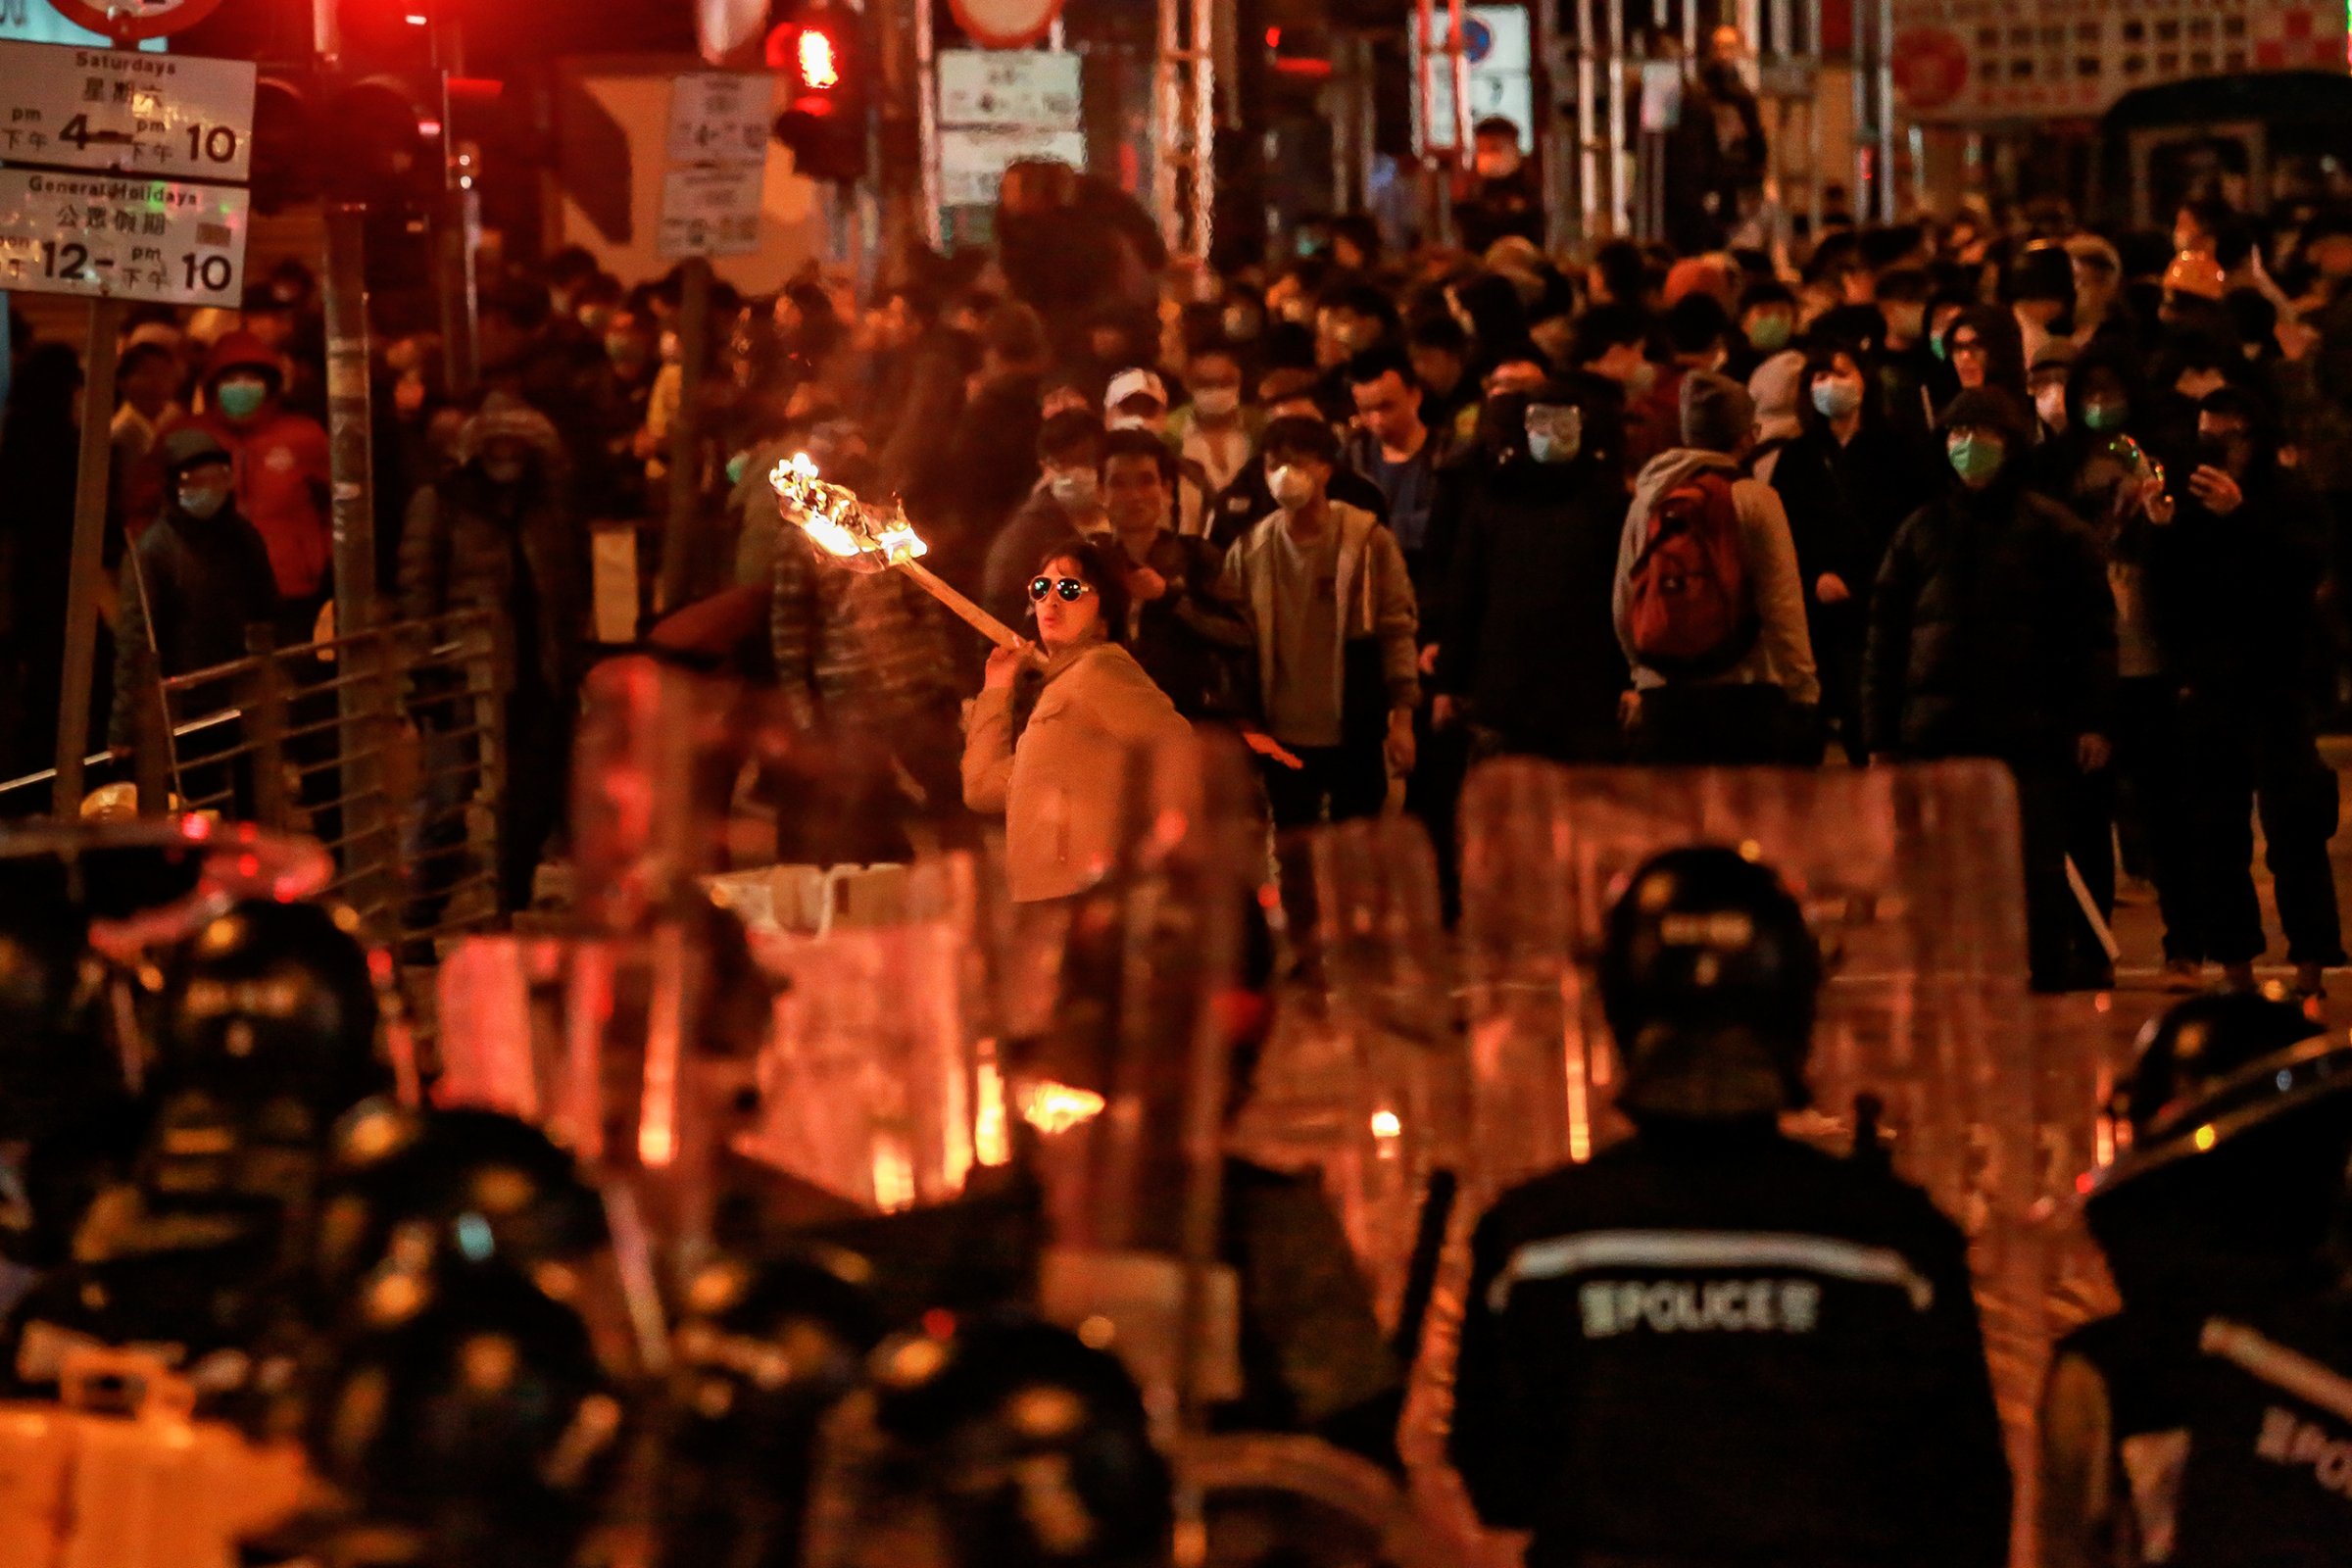 In a rare violent night, protesters confront police Feb. 9 in the Hong Kong district of Mong Kok